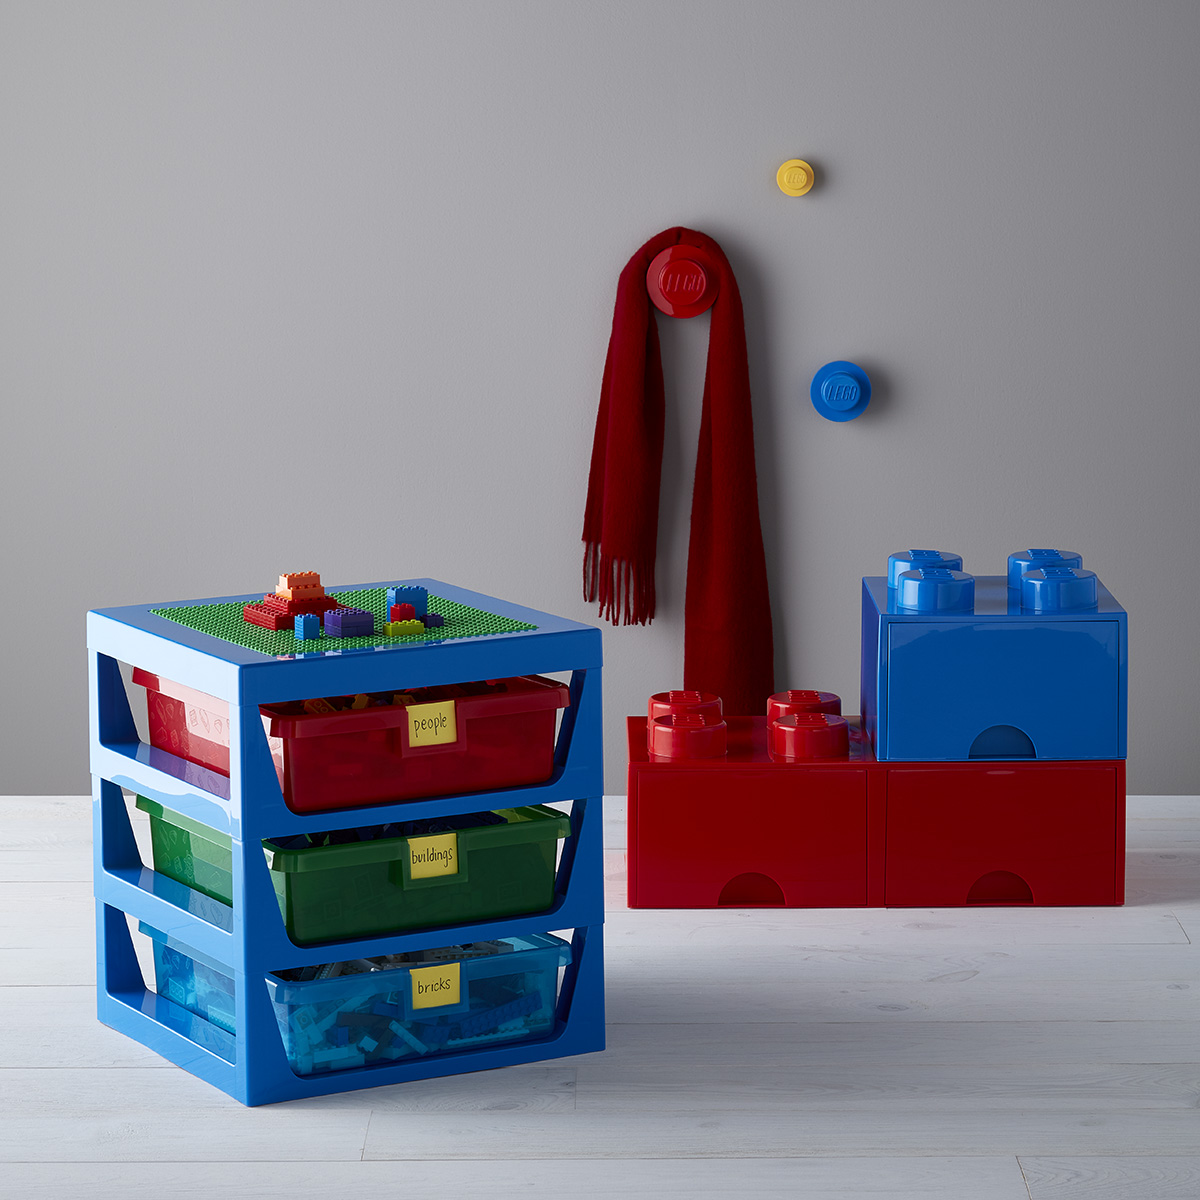 LEGO 3-Tier Drawer Organizer with Baseplate | The Container Store